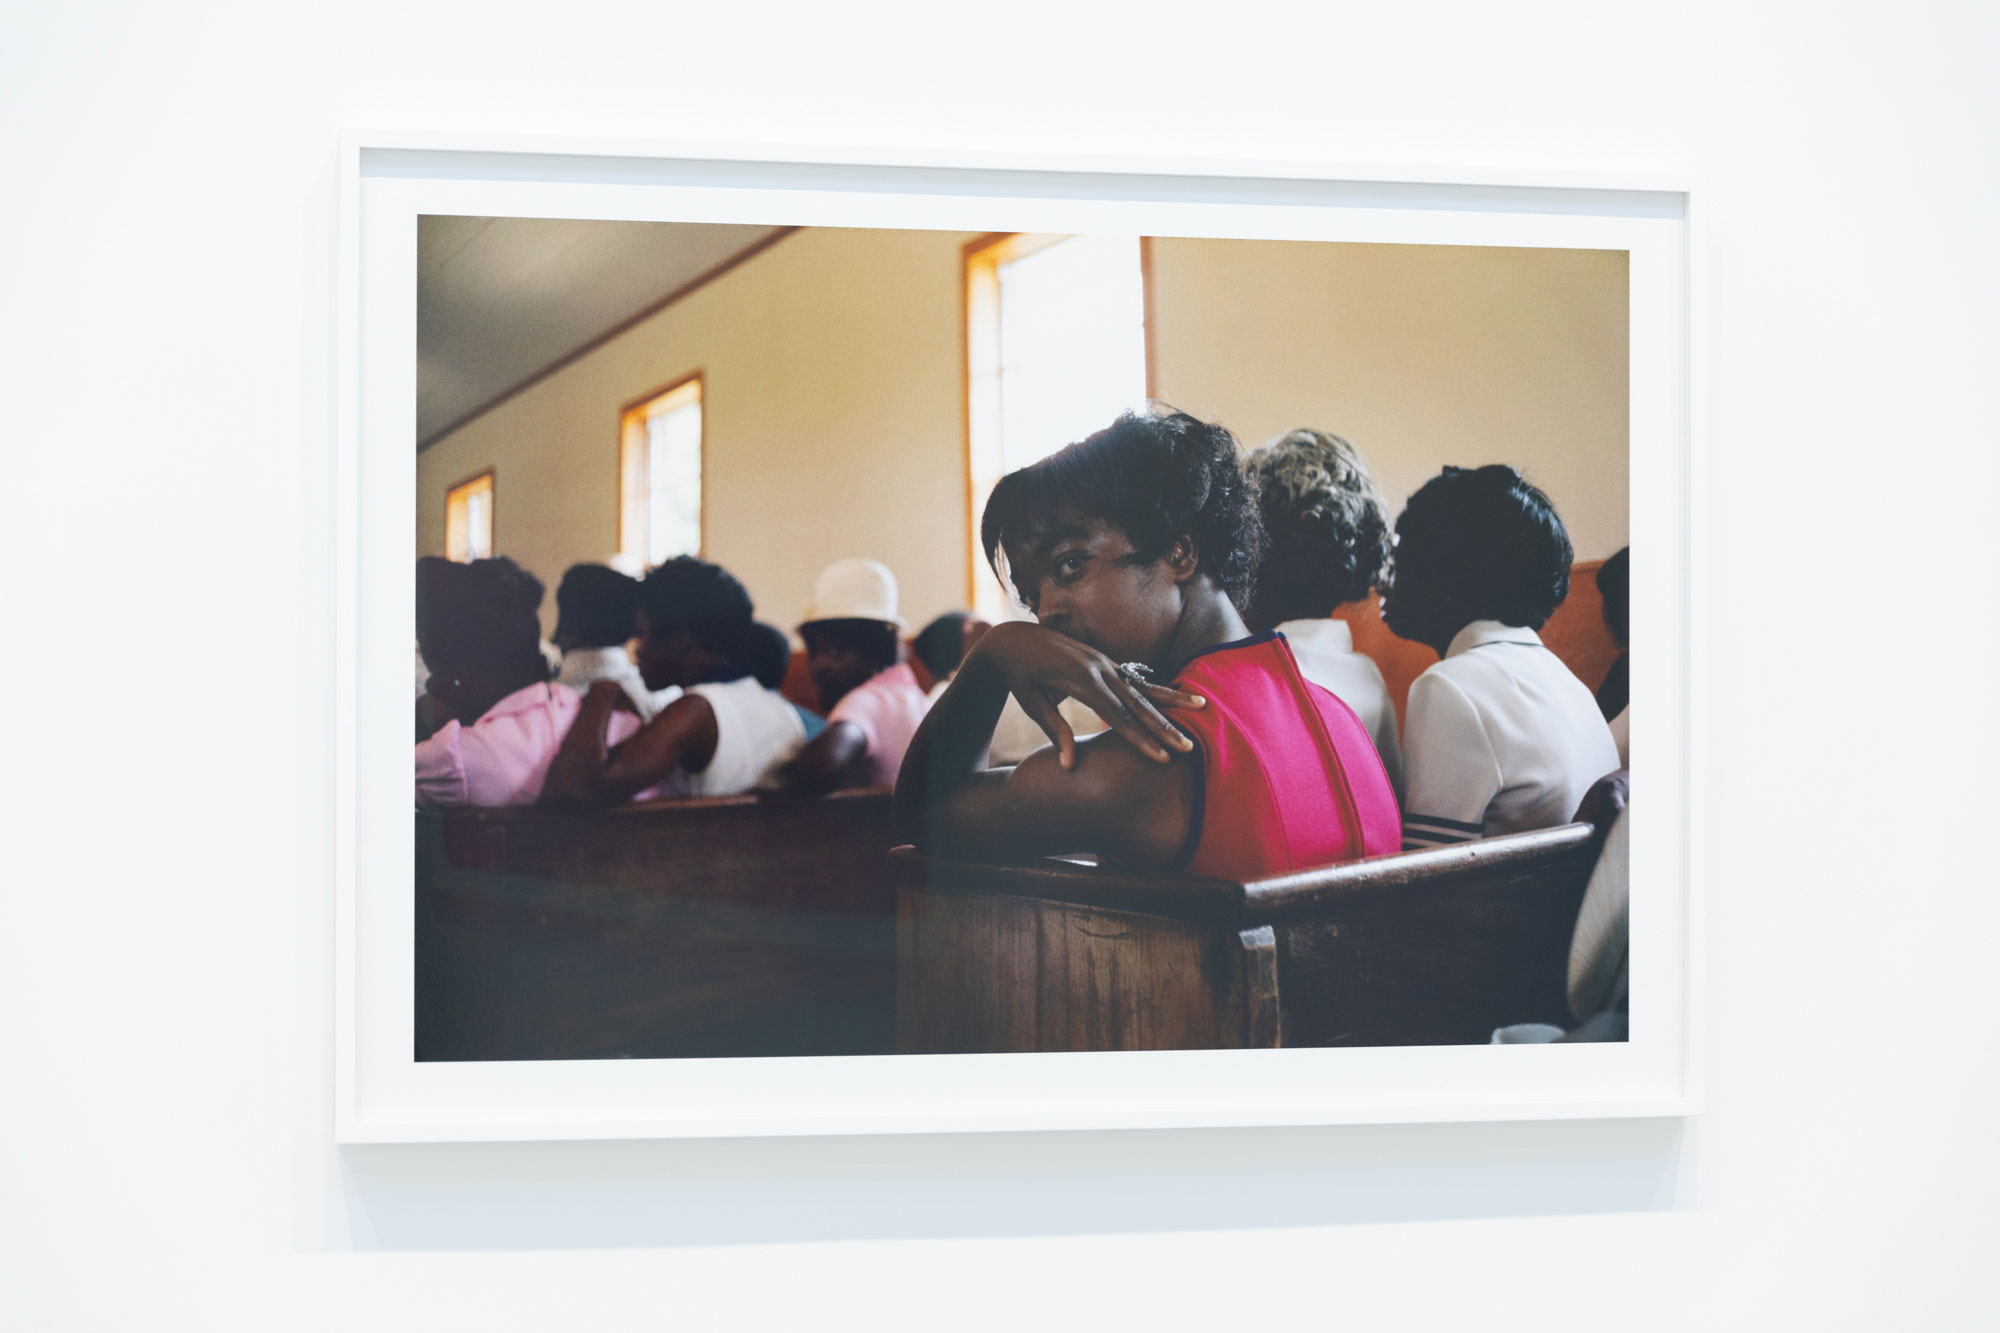 A photo of a horizontal print photograph set in a white frame against a white wall. The framed photo is a close-up image taken from behind of a person in a bright pink dress. The woman is sitting in a crowded church pew and twisted around so that the profile of her face is visible. She has her hand resting on her shoulder and is looking just to the left of the camera. Other people fill the pews in front of her. 